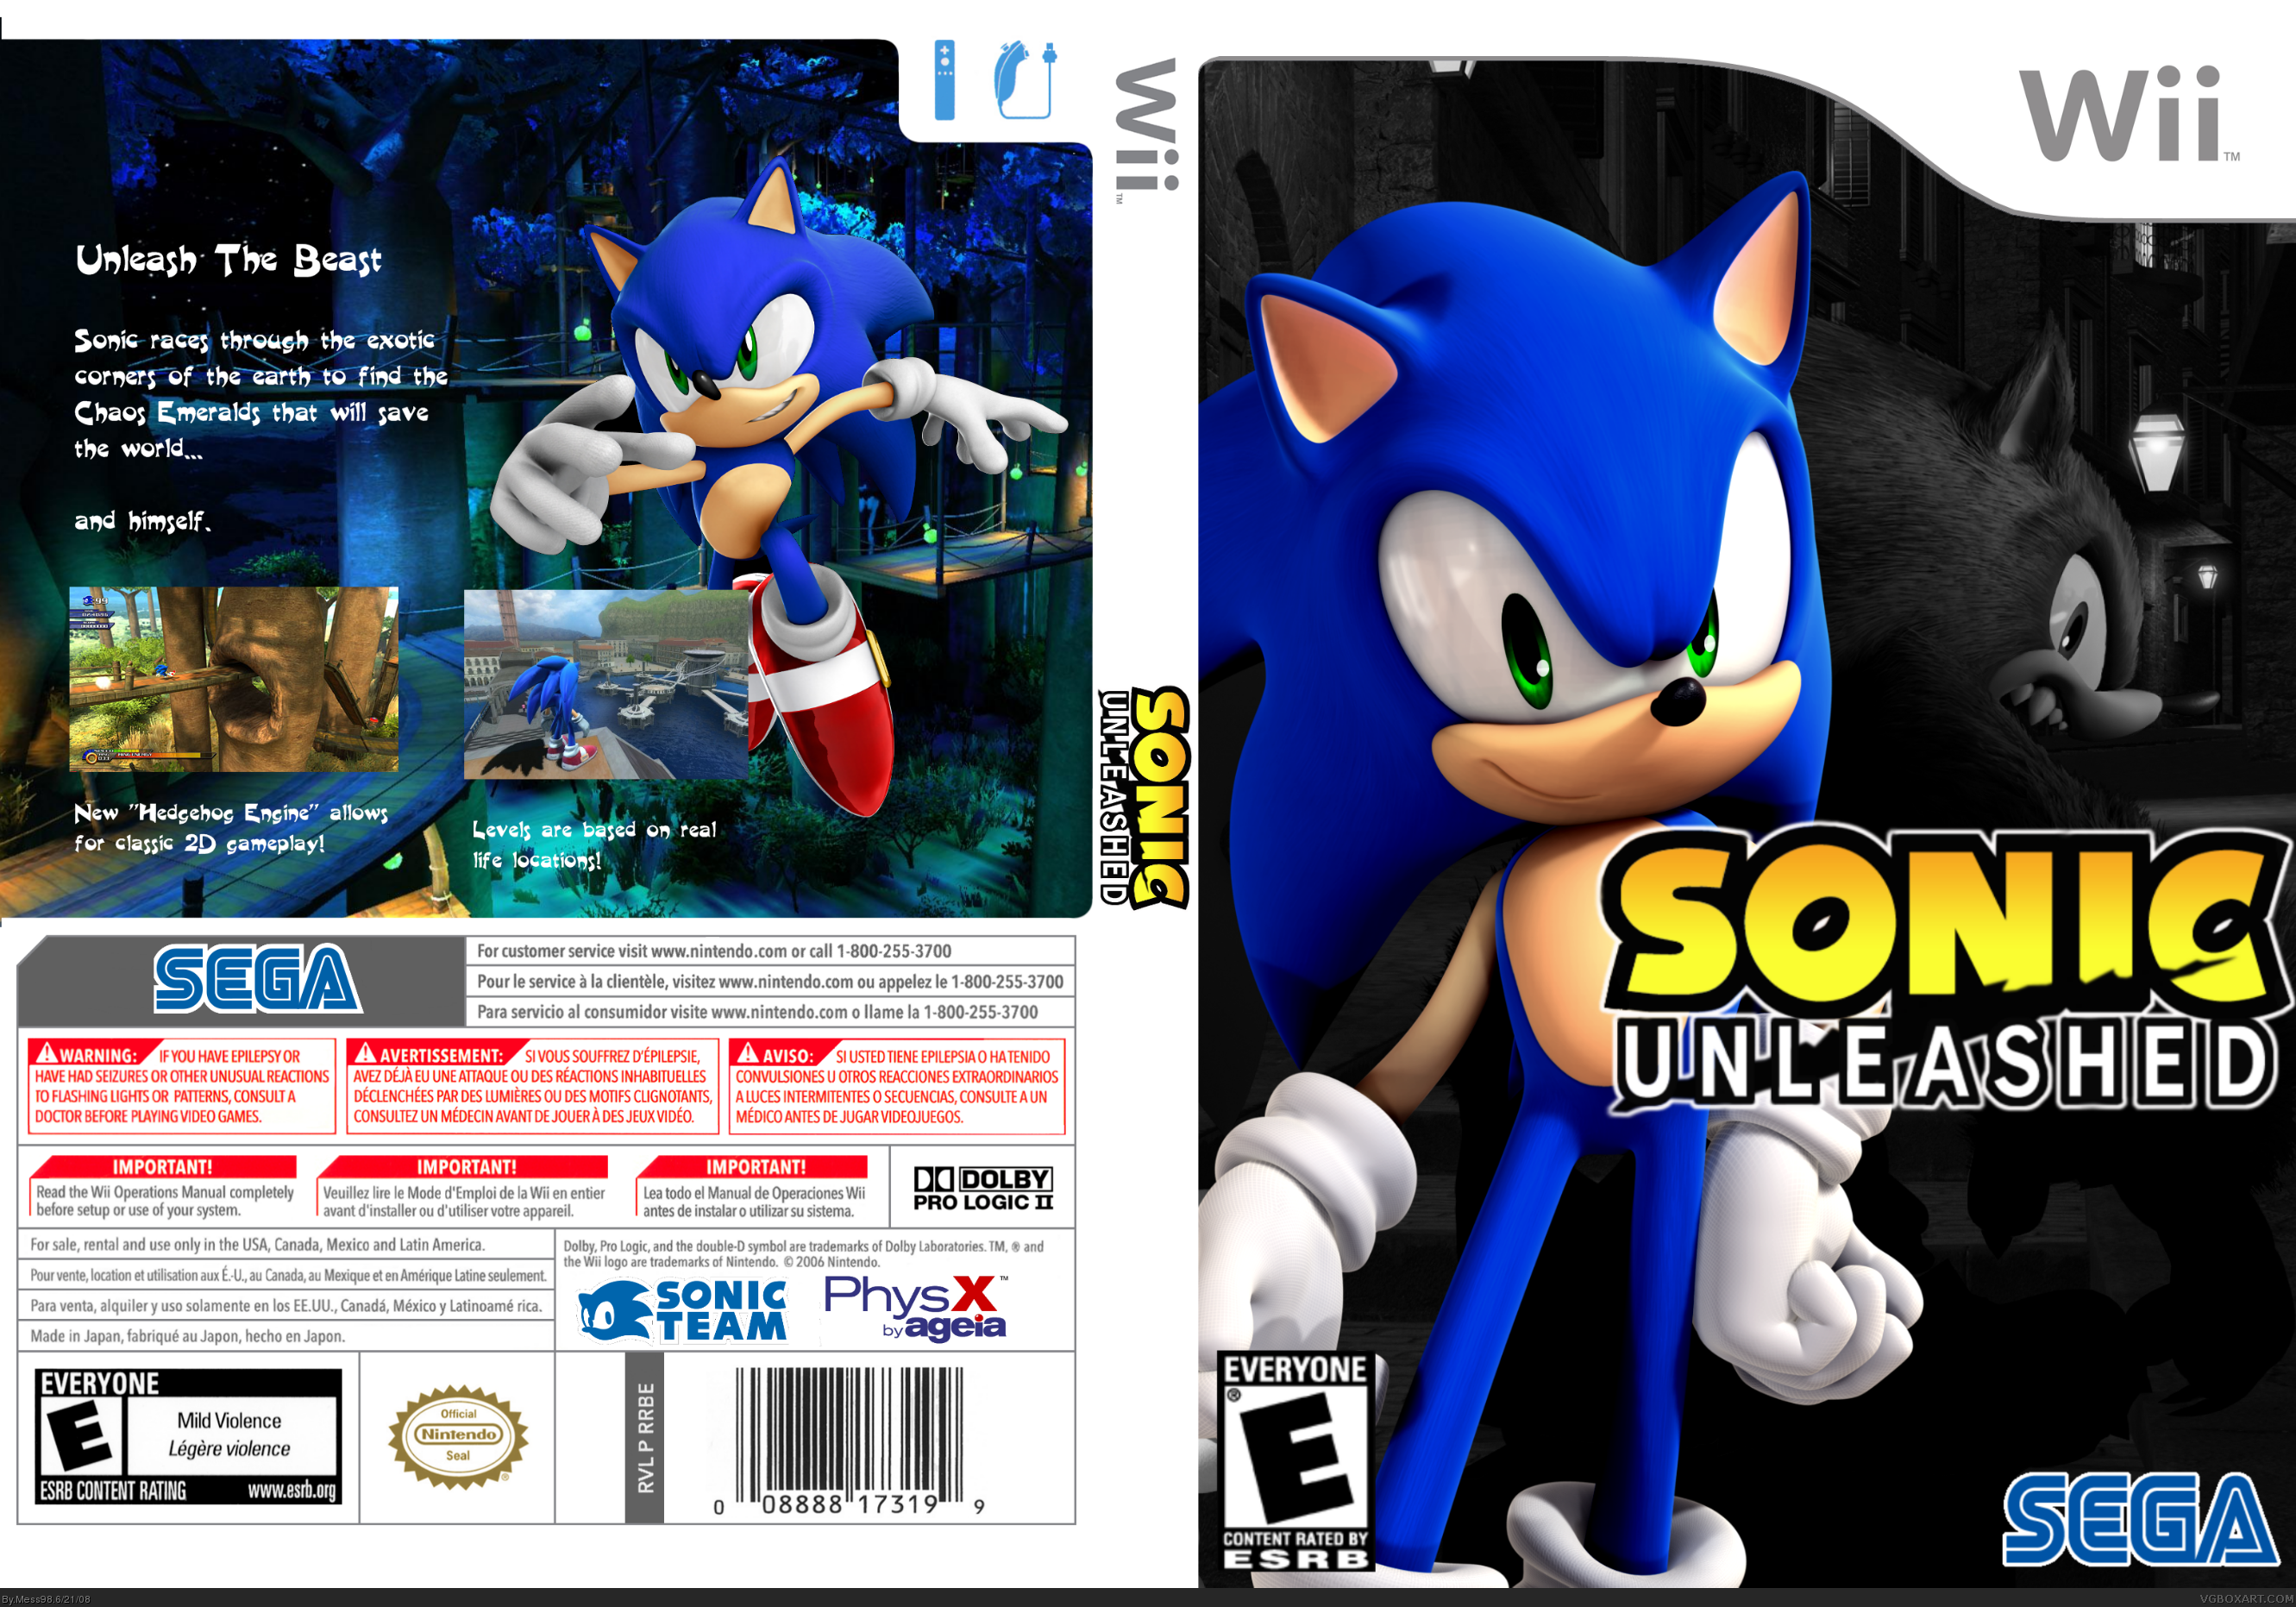 Viewing full size Sonic Unleashed box cover.